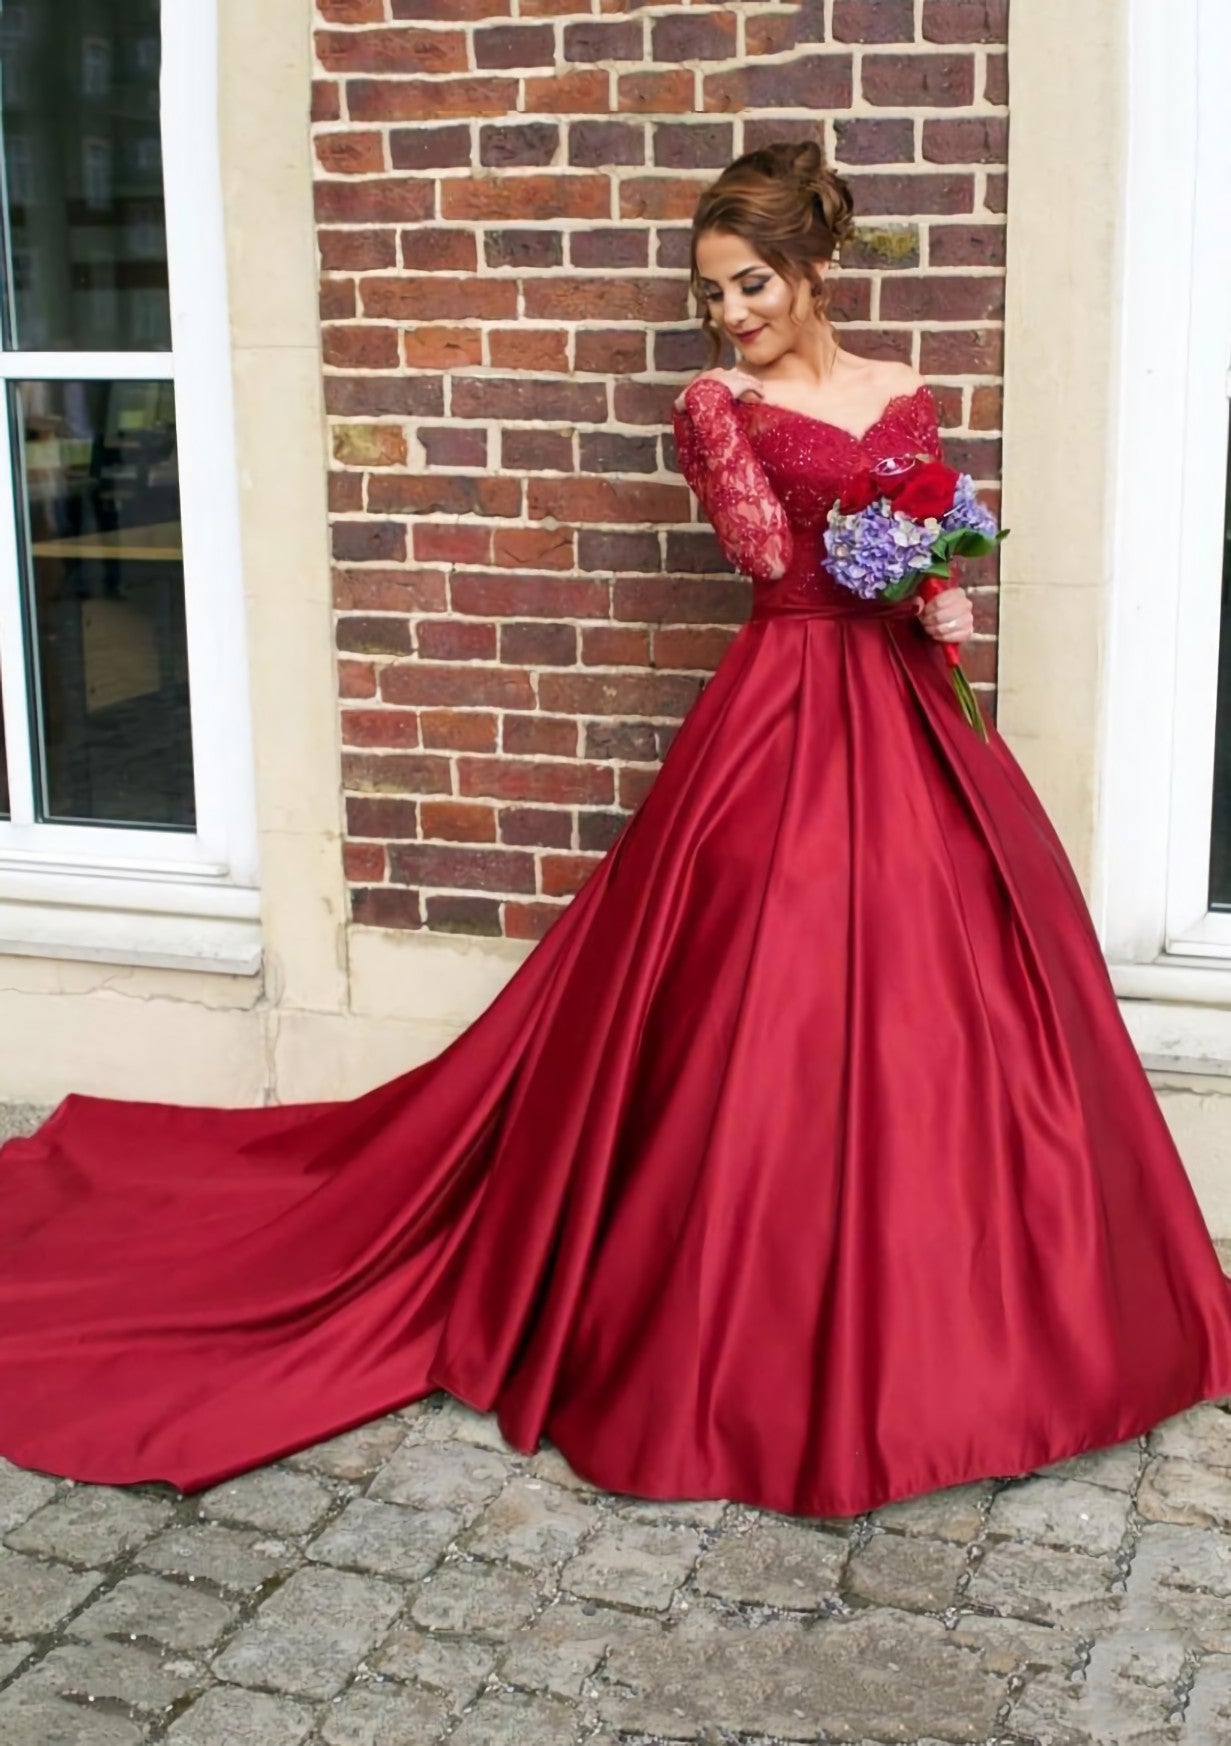 Satin Prom Dress Outfits For Women Ball Gown V Neck Cathedral Train With Lace